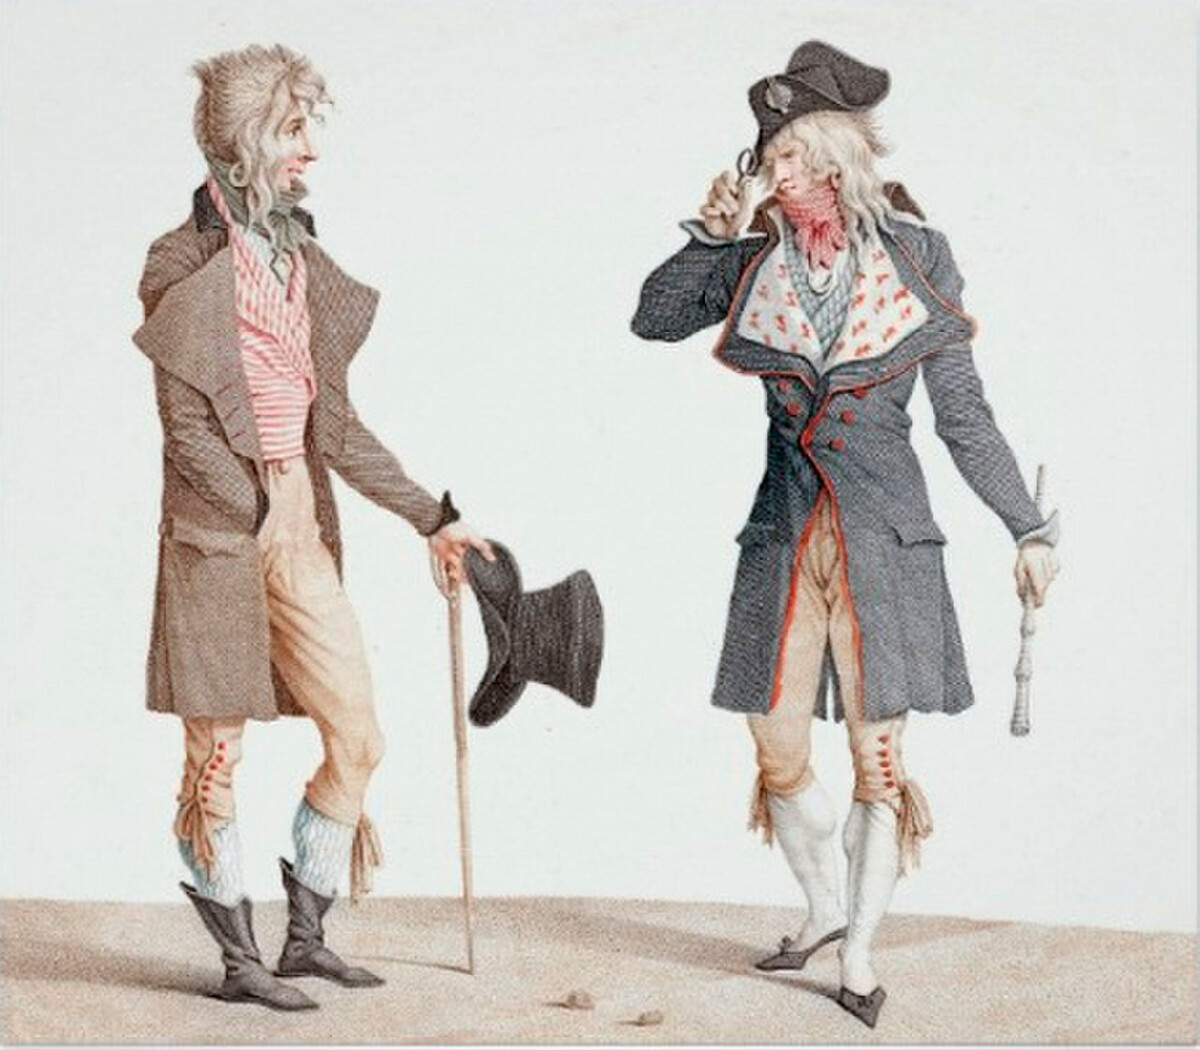 Les incroyables, estampe, 1796, C. Vernet. Both of the 'incredibles' (incroyables) are wearing a 